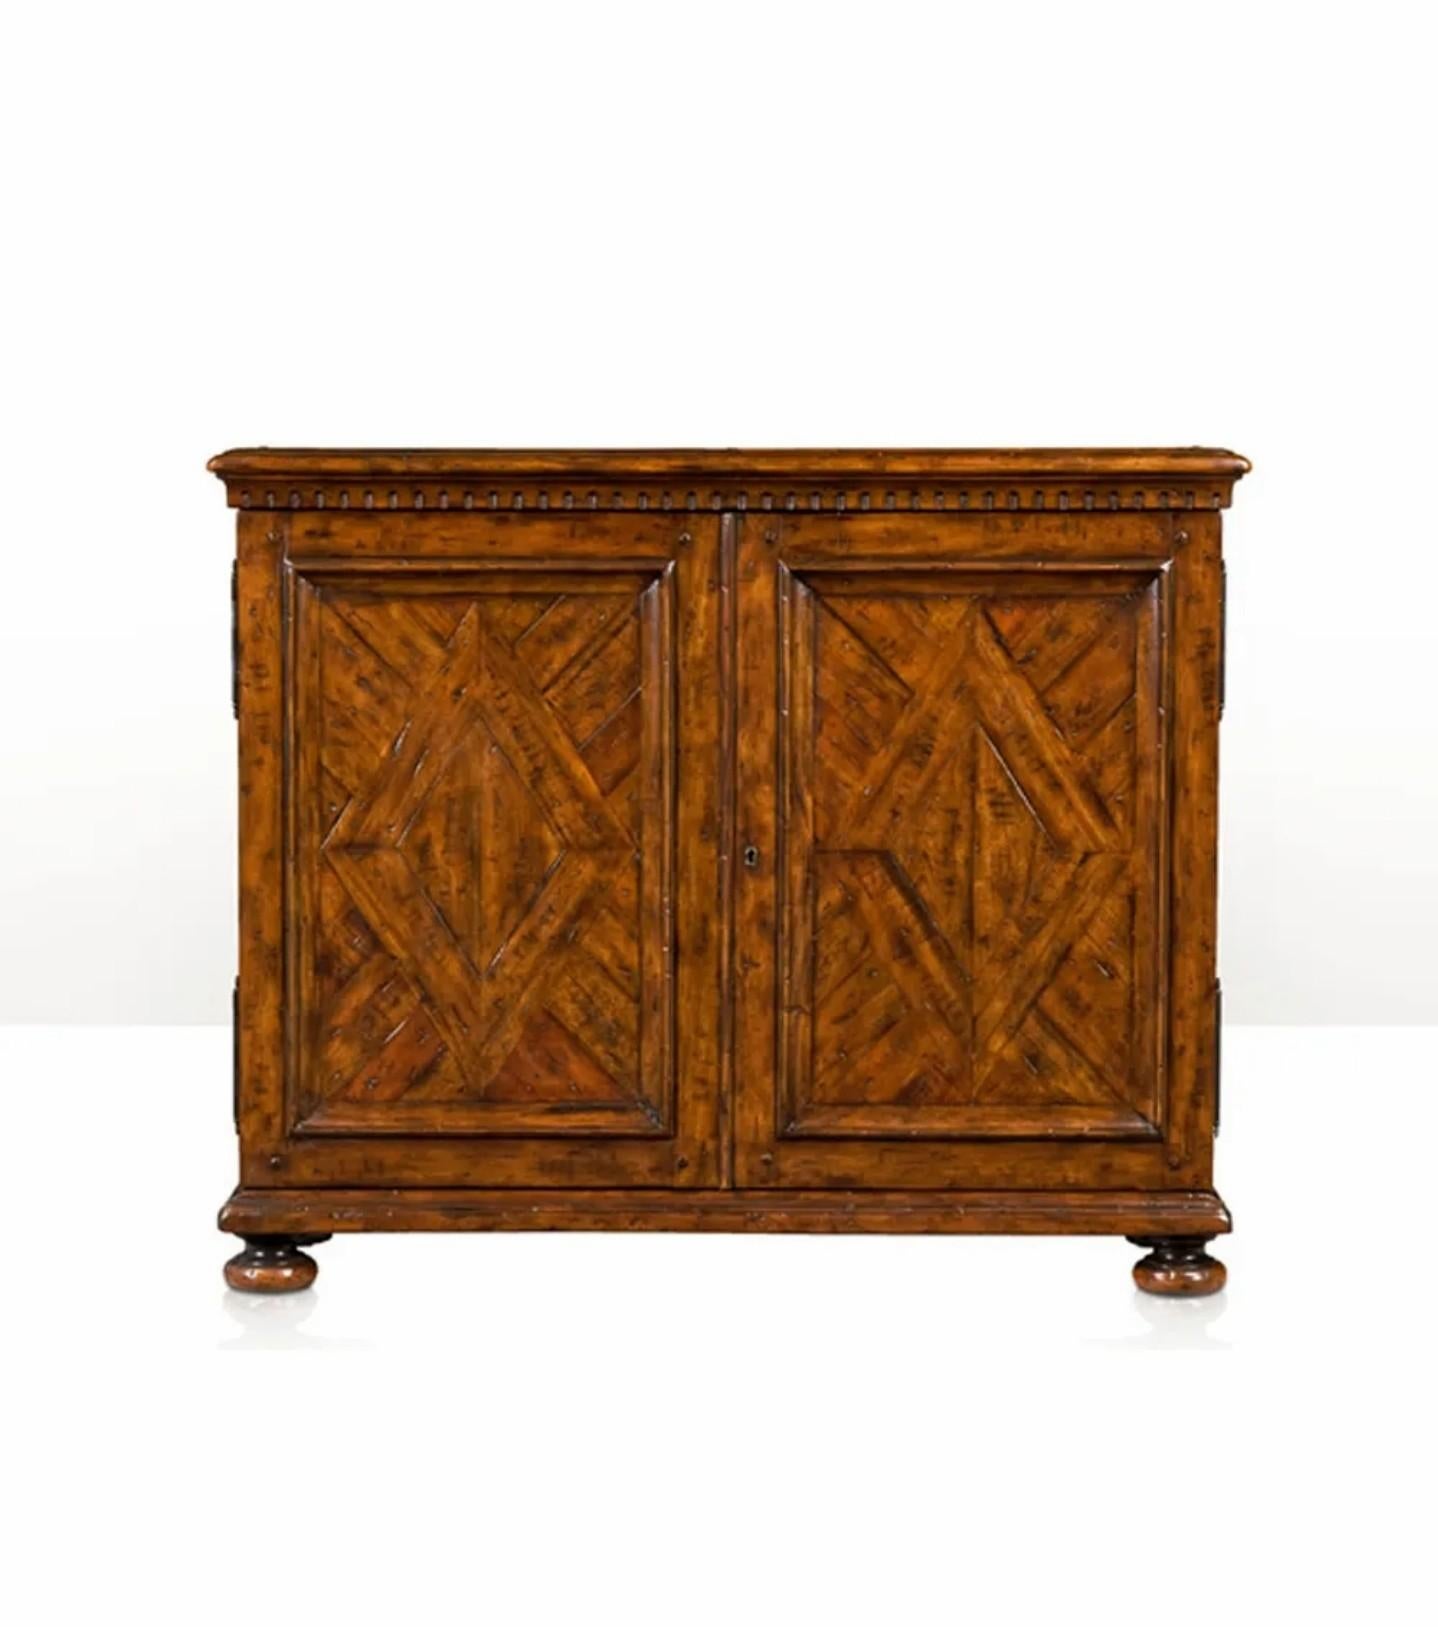 A rare fine quality Theodore Alexander Sir John's Cabinet exquisitely handcrafted of reclaimed antique wood and part of the iconic Castle Bromwich Collection. 

The Castle Bromwich name comes from an Elizabethan manor house in rural England.